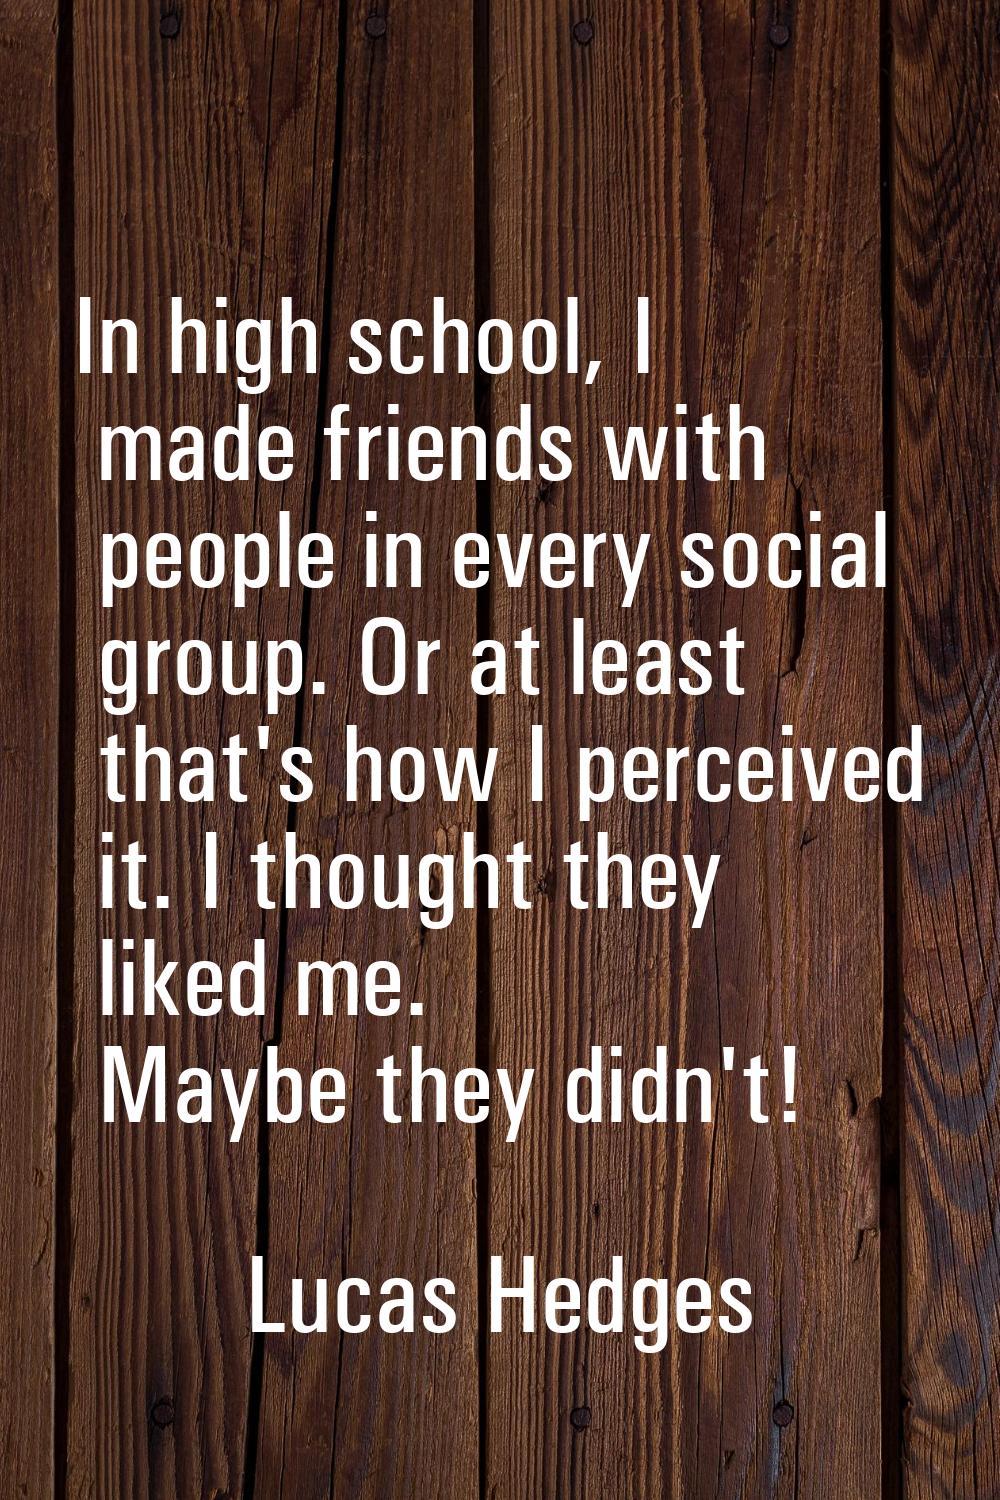 In high school, I made friends with people in every social group. Or at least that's how I perceive